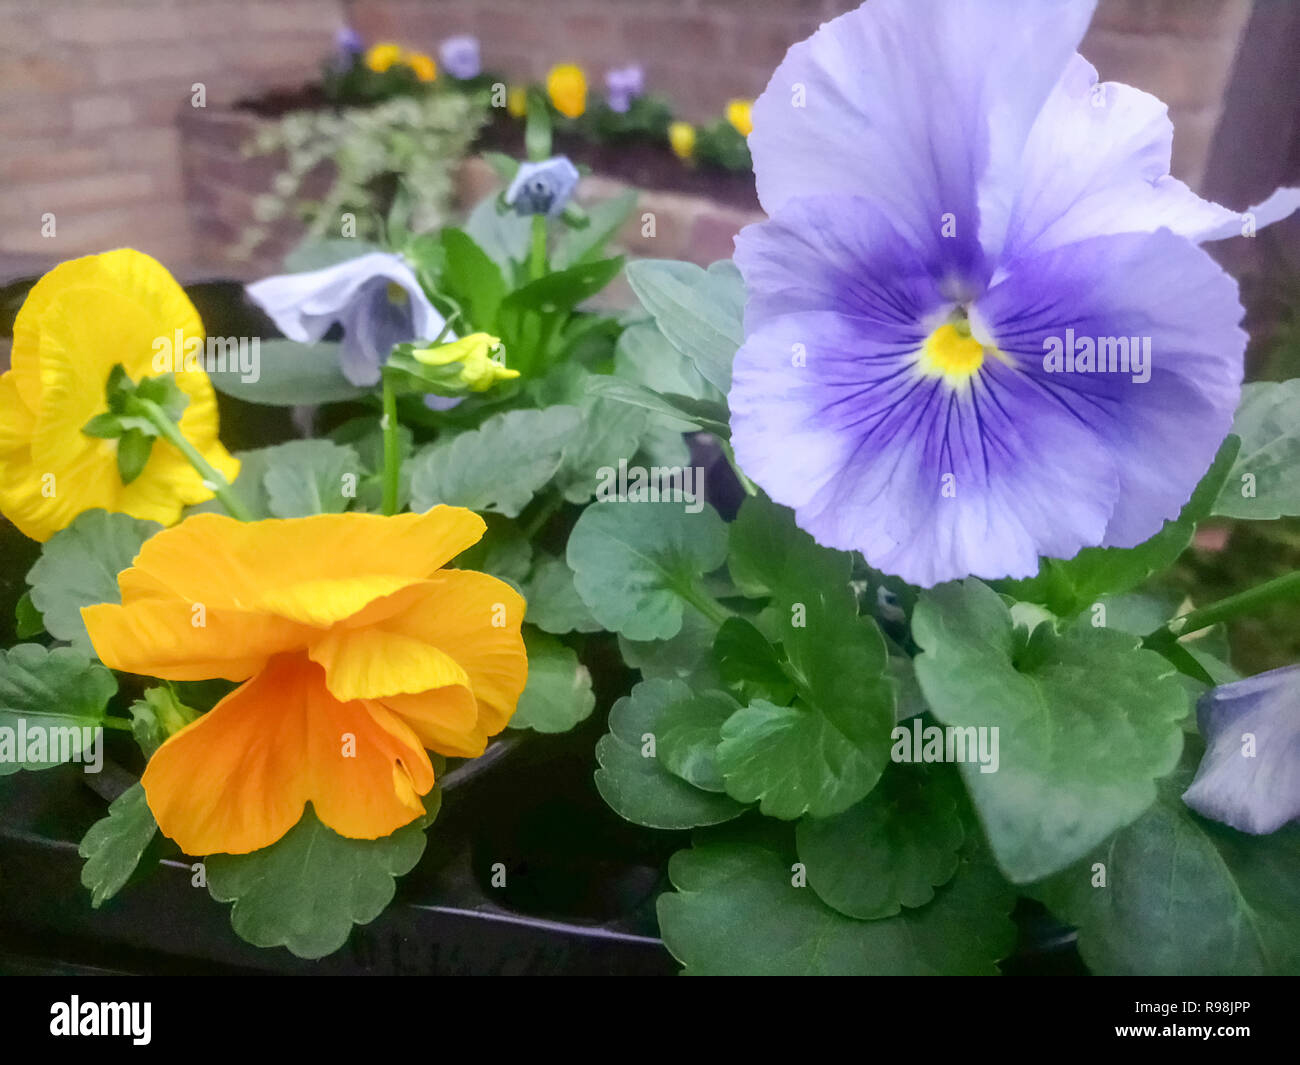 Flowering pansies with complementary colors. Yellow and blue go well together. Stock Photo